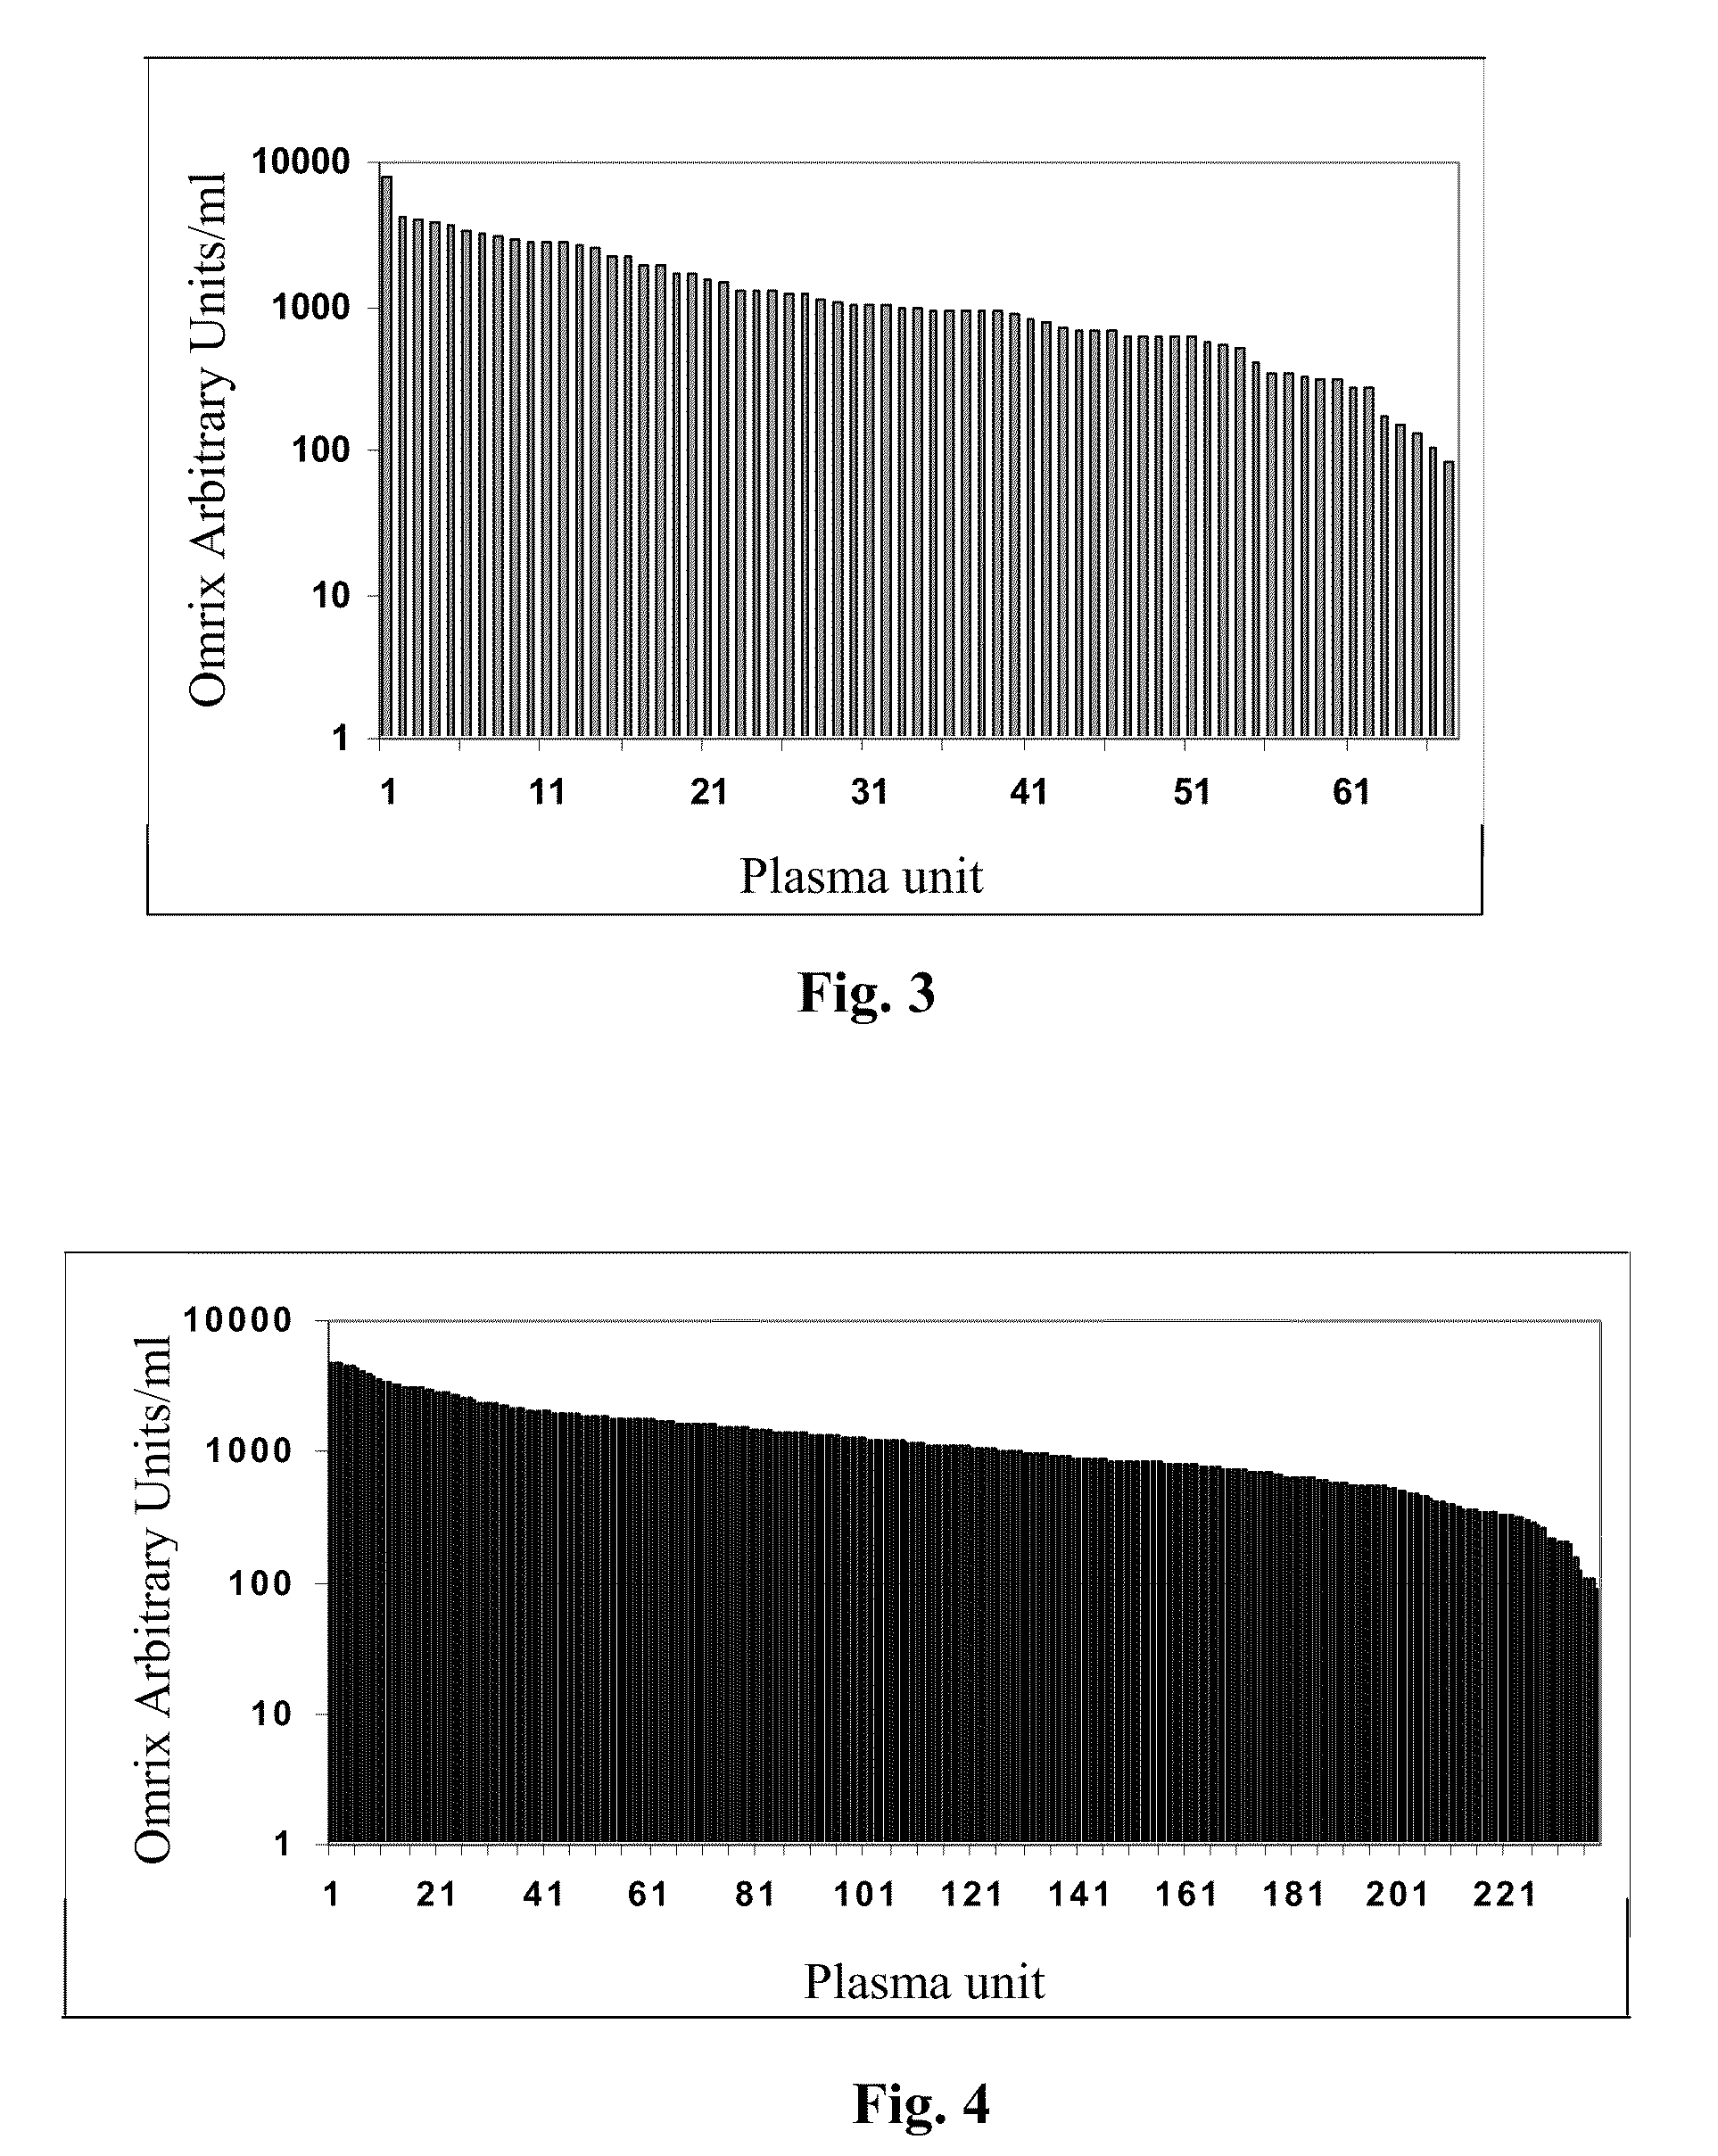 Products for prophylaxis and/or treatment of viral diseases and methods of making and using same